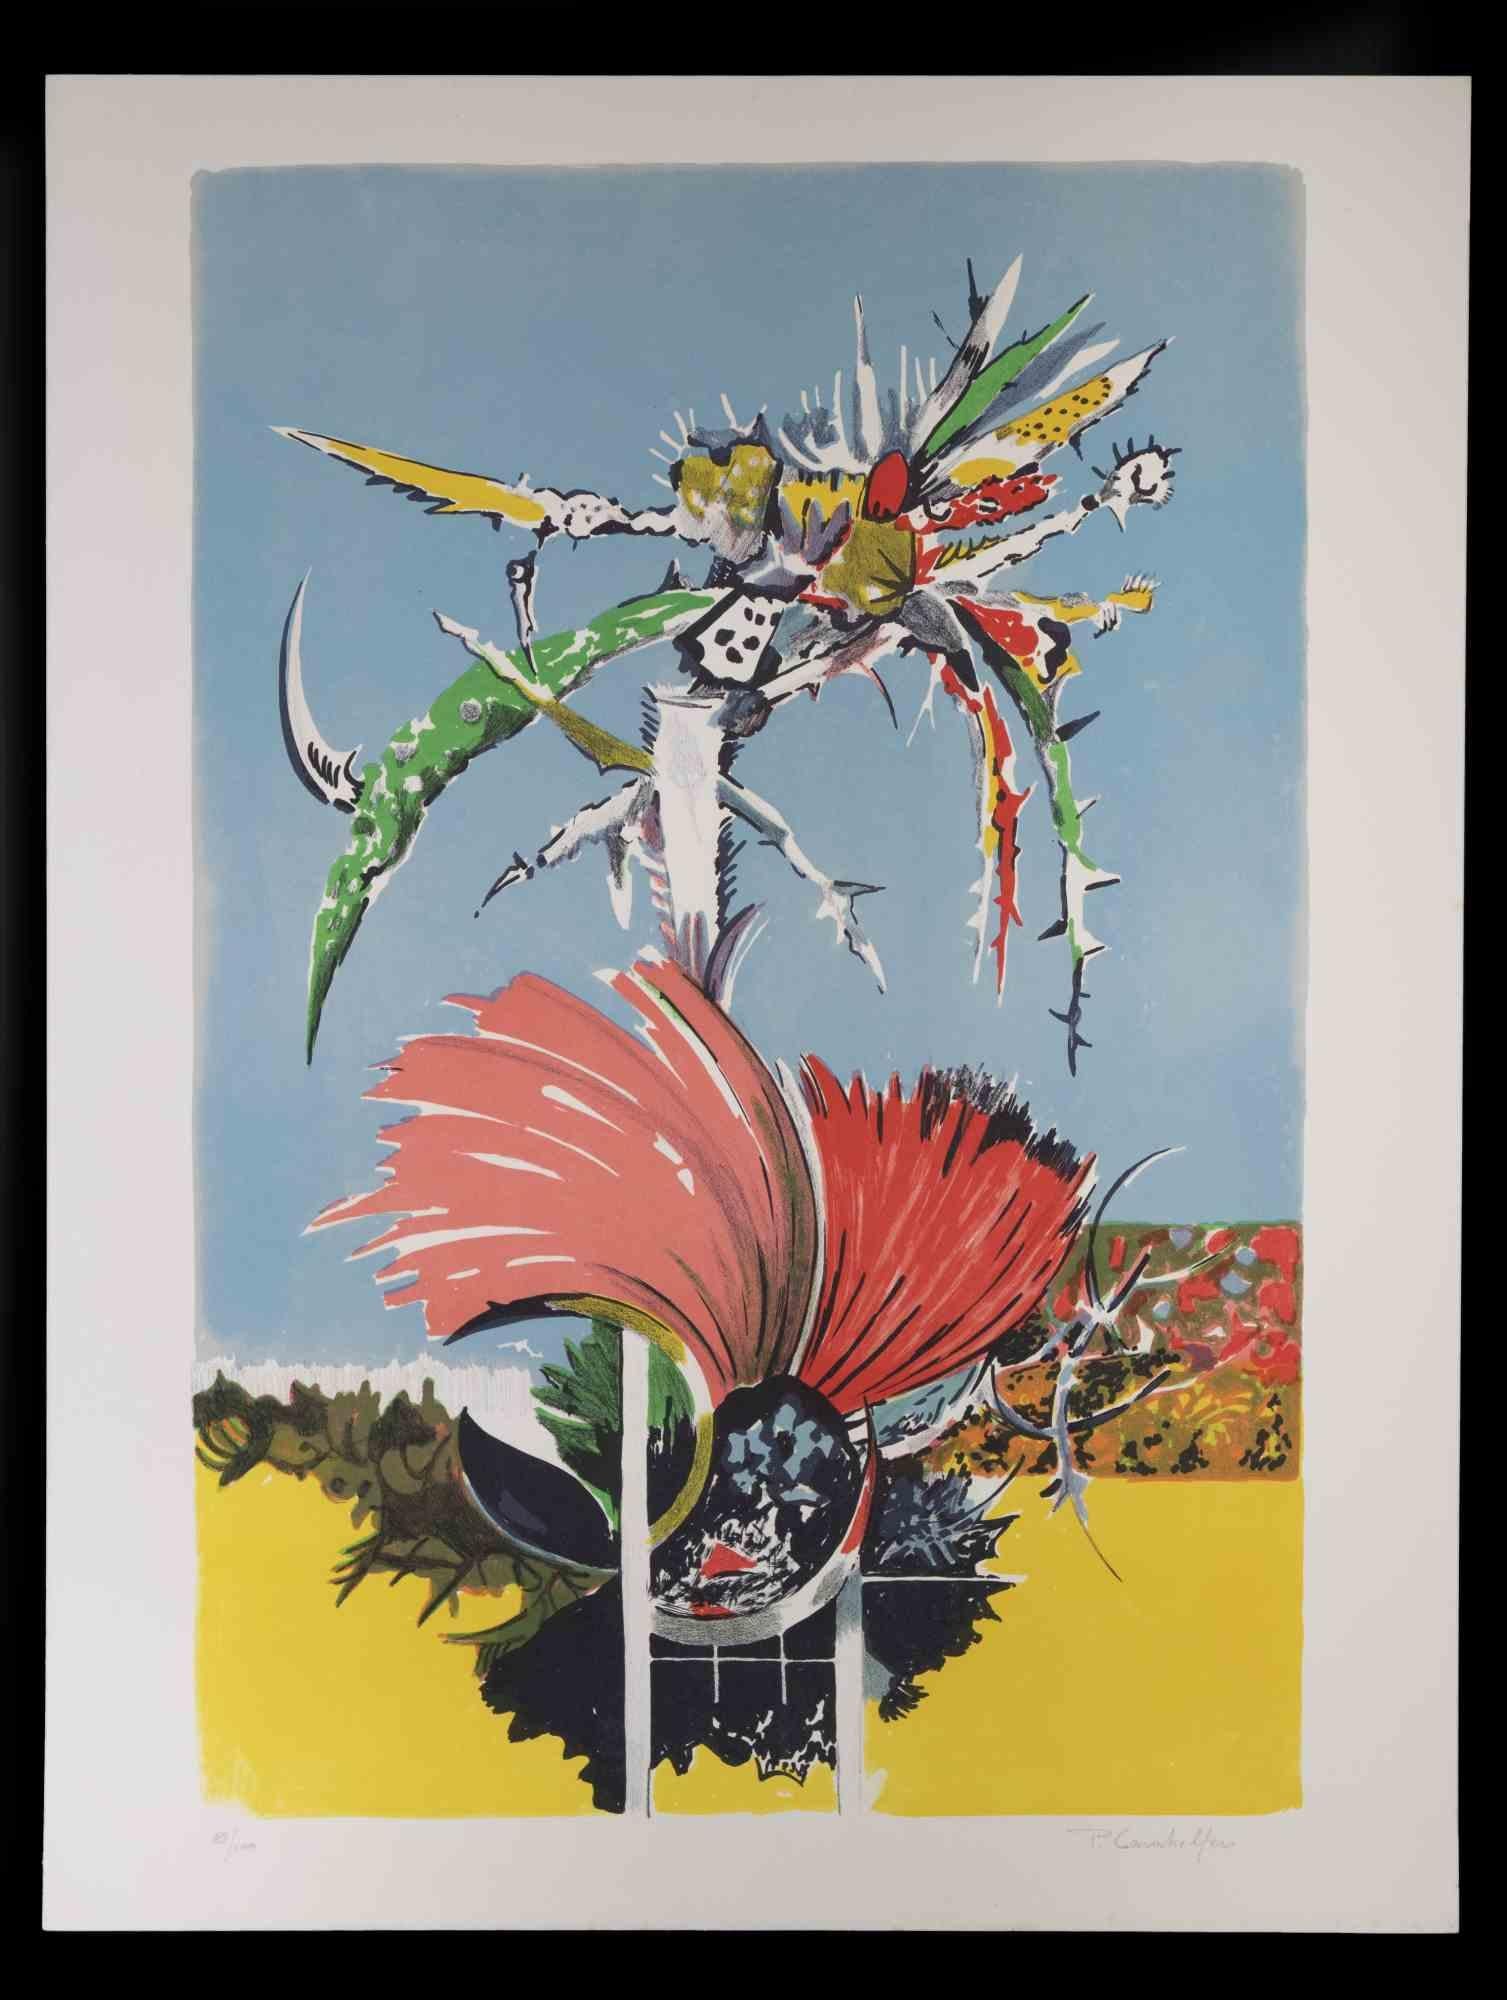 Nature Exposure is an original lithography, realized by Pietro Carabellese in the 1970s.

Hand-signed  on the bottom right. Numbered  on the bottom left. Edition of 100.